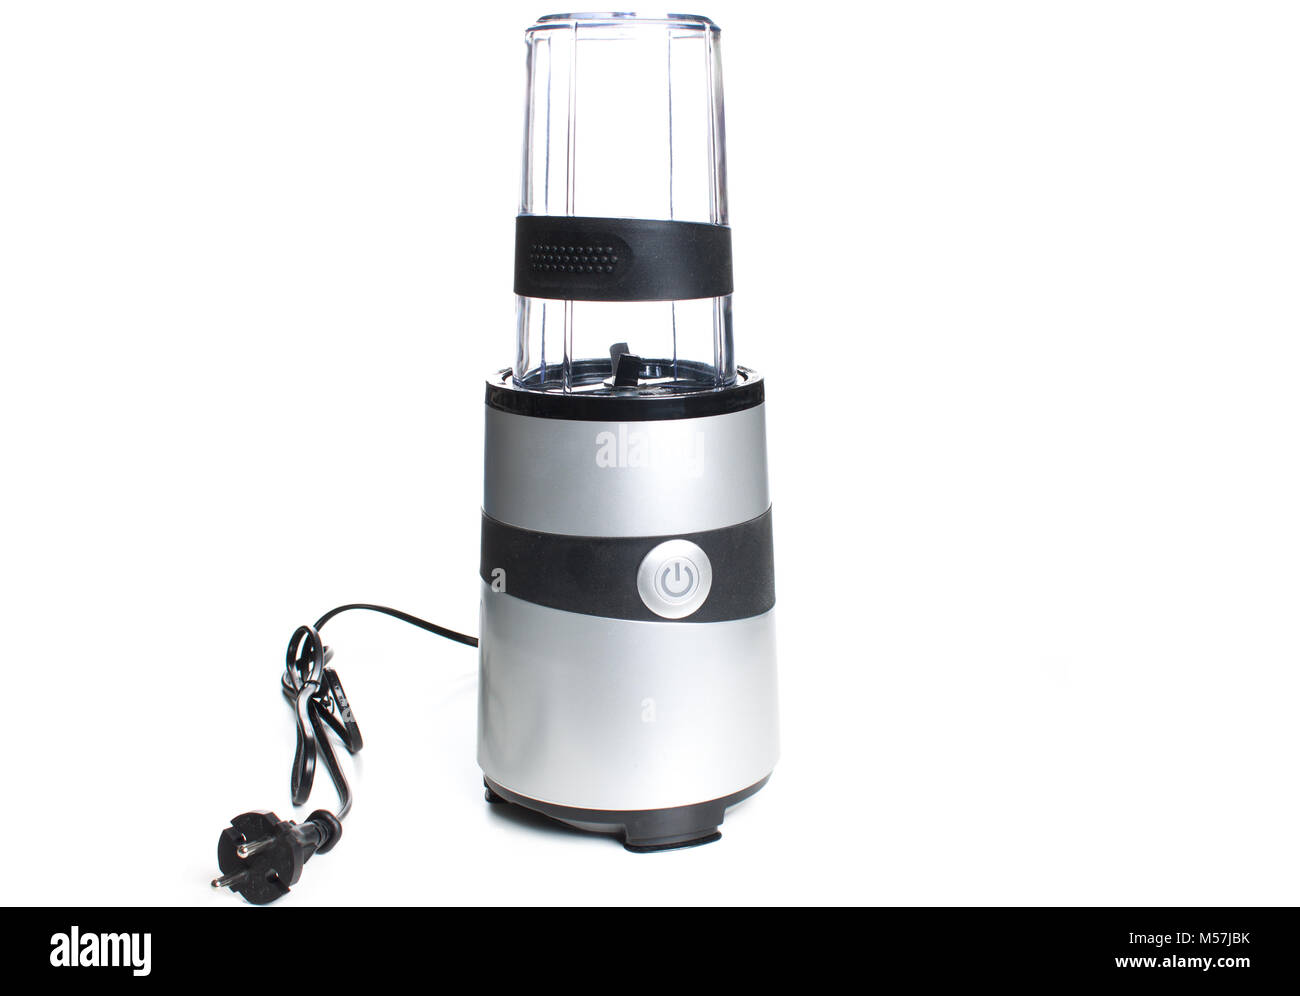 electric blender on a white background. Stock Photo